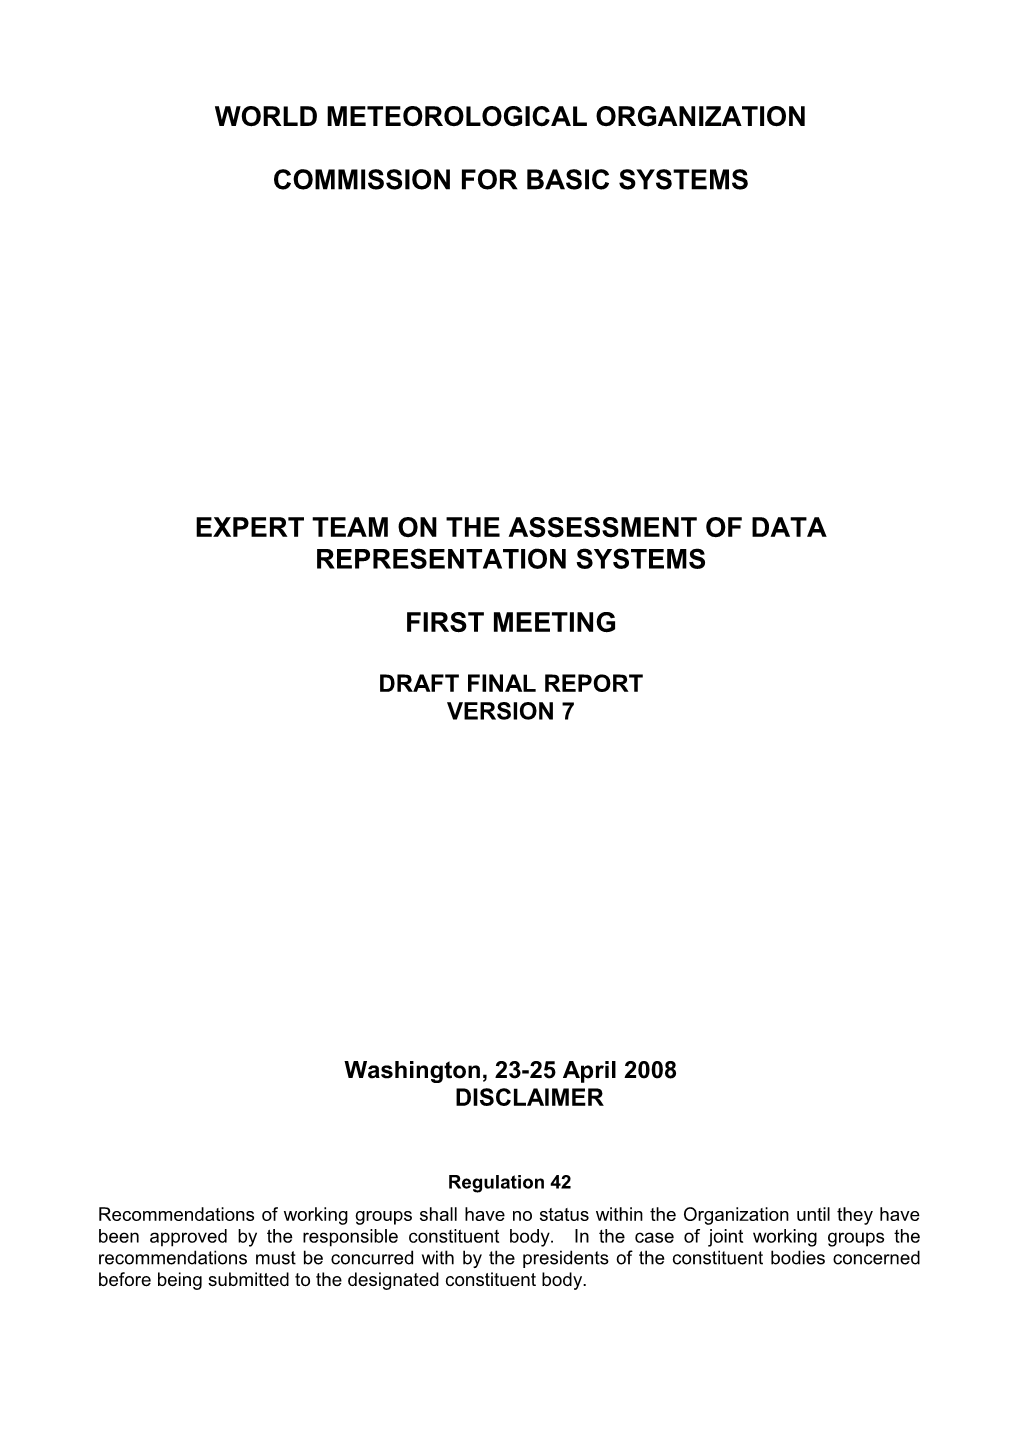 Report of ET on Integrated Data Management - 2002